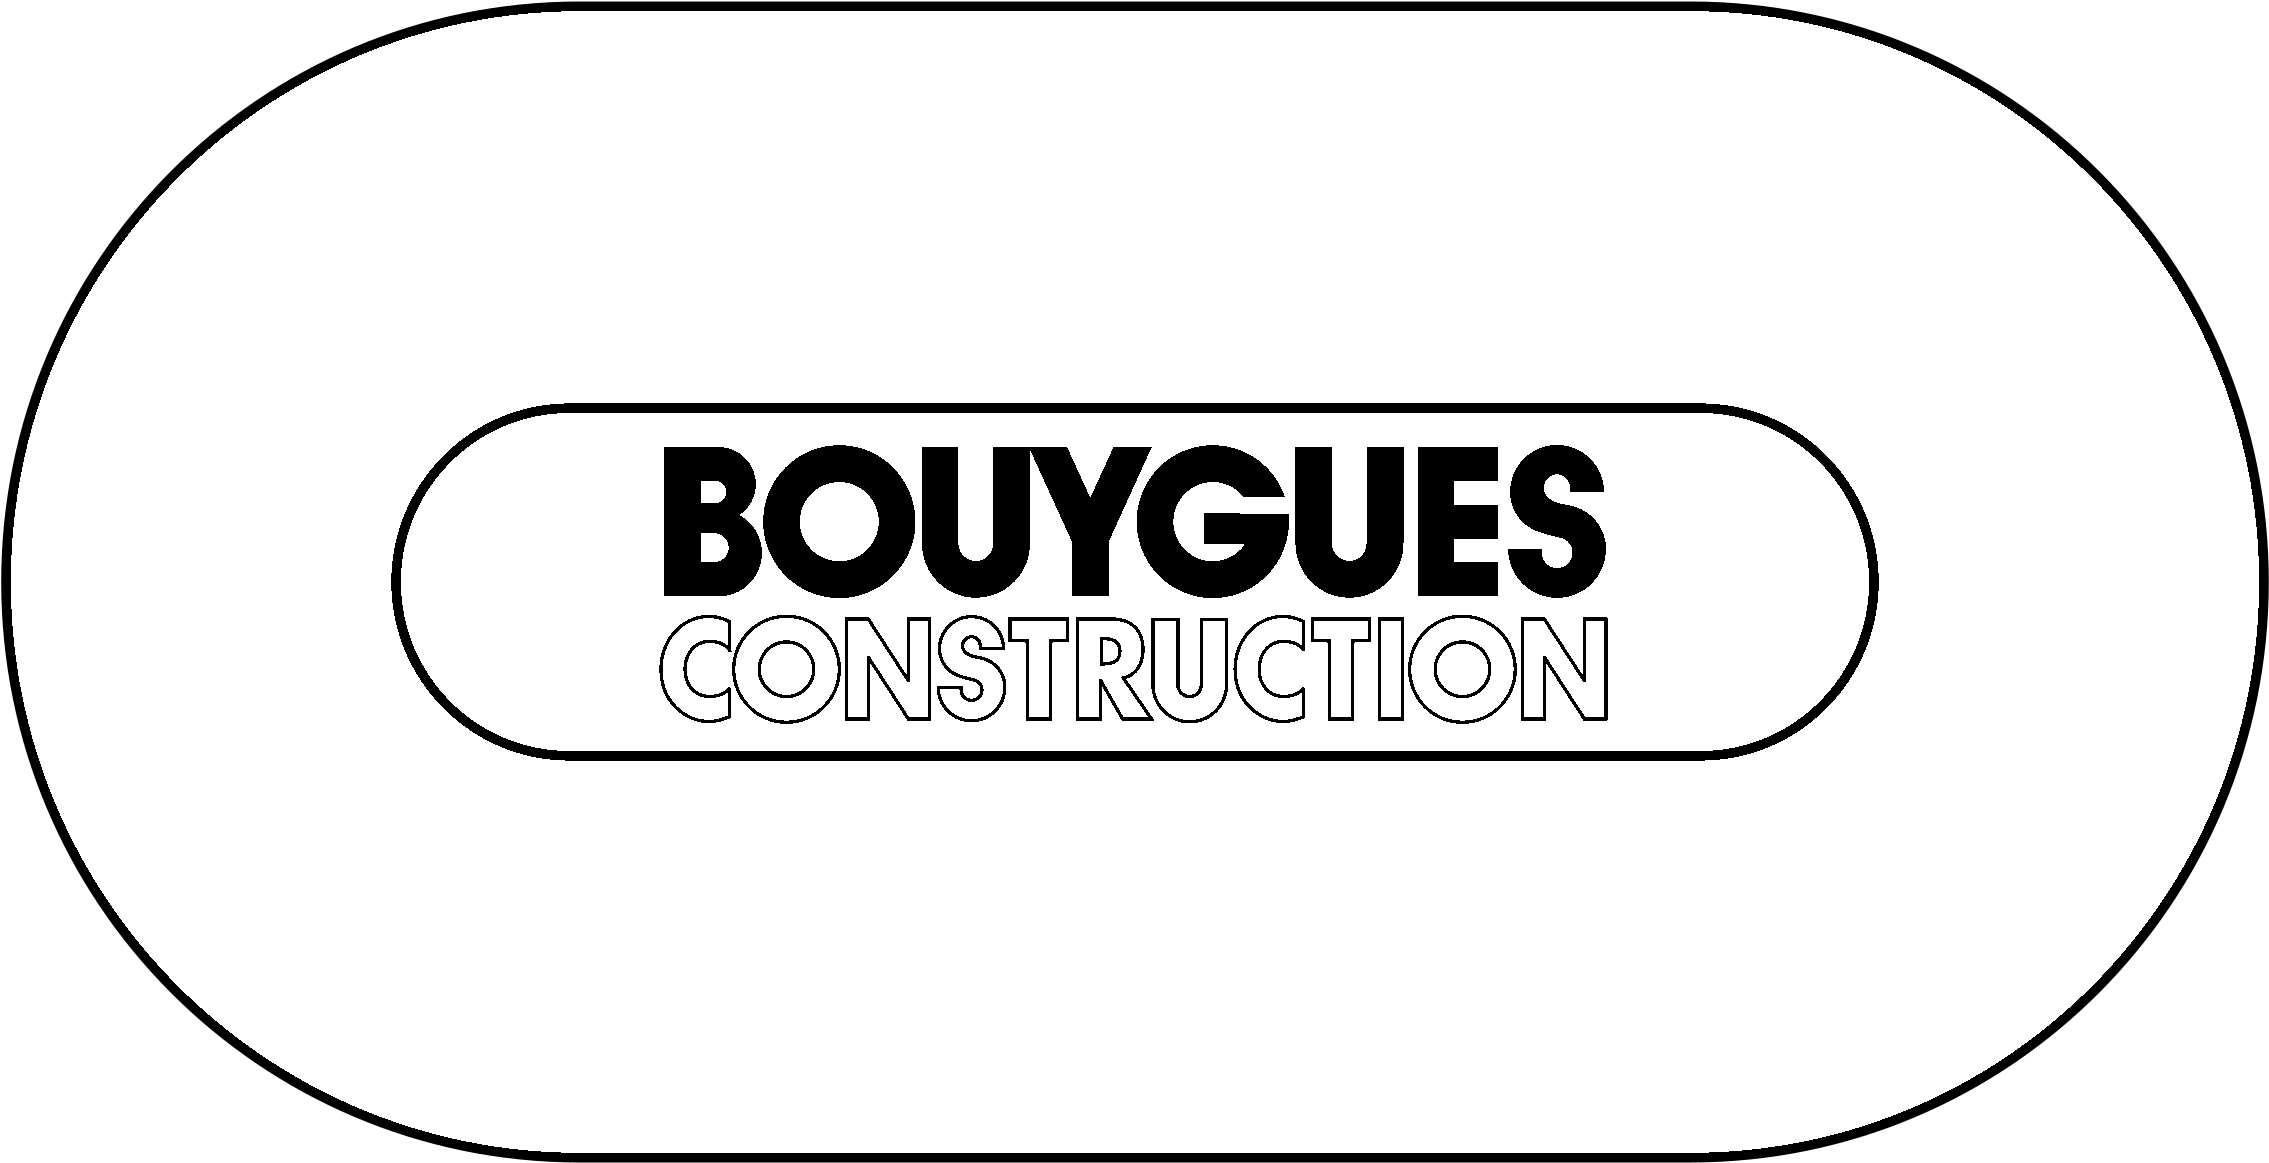 Bouygues Construction Logo Blackand White PNG image